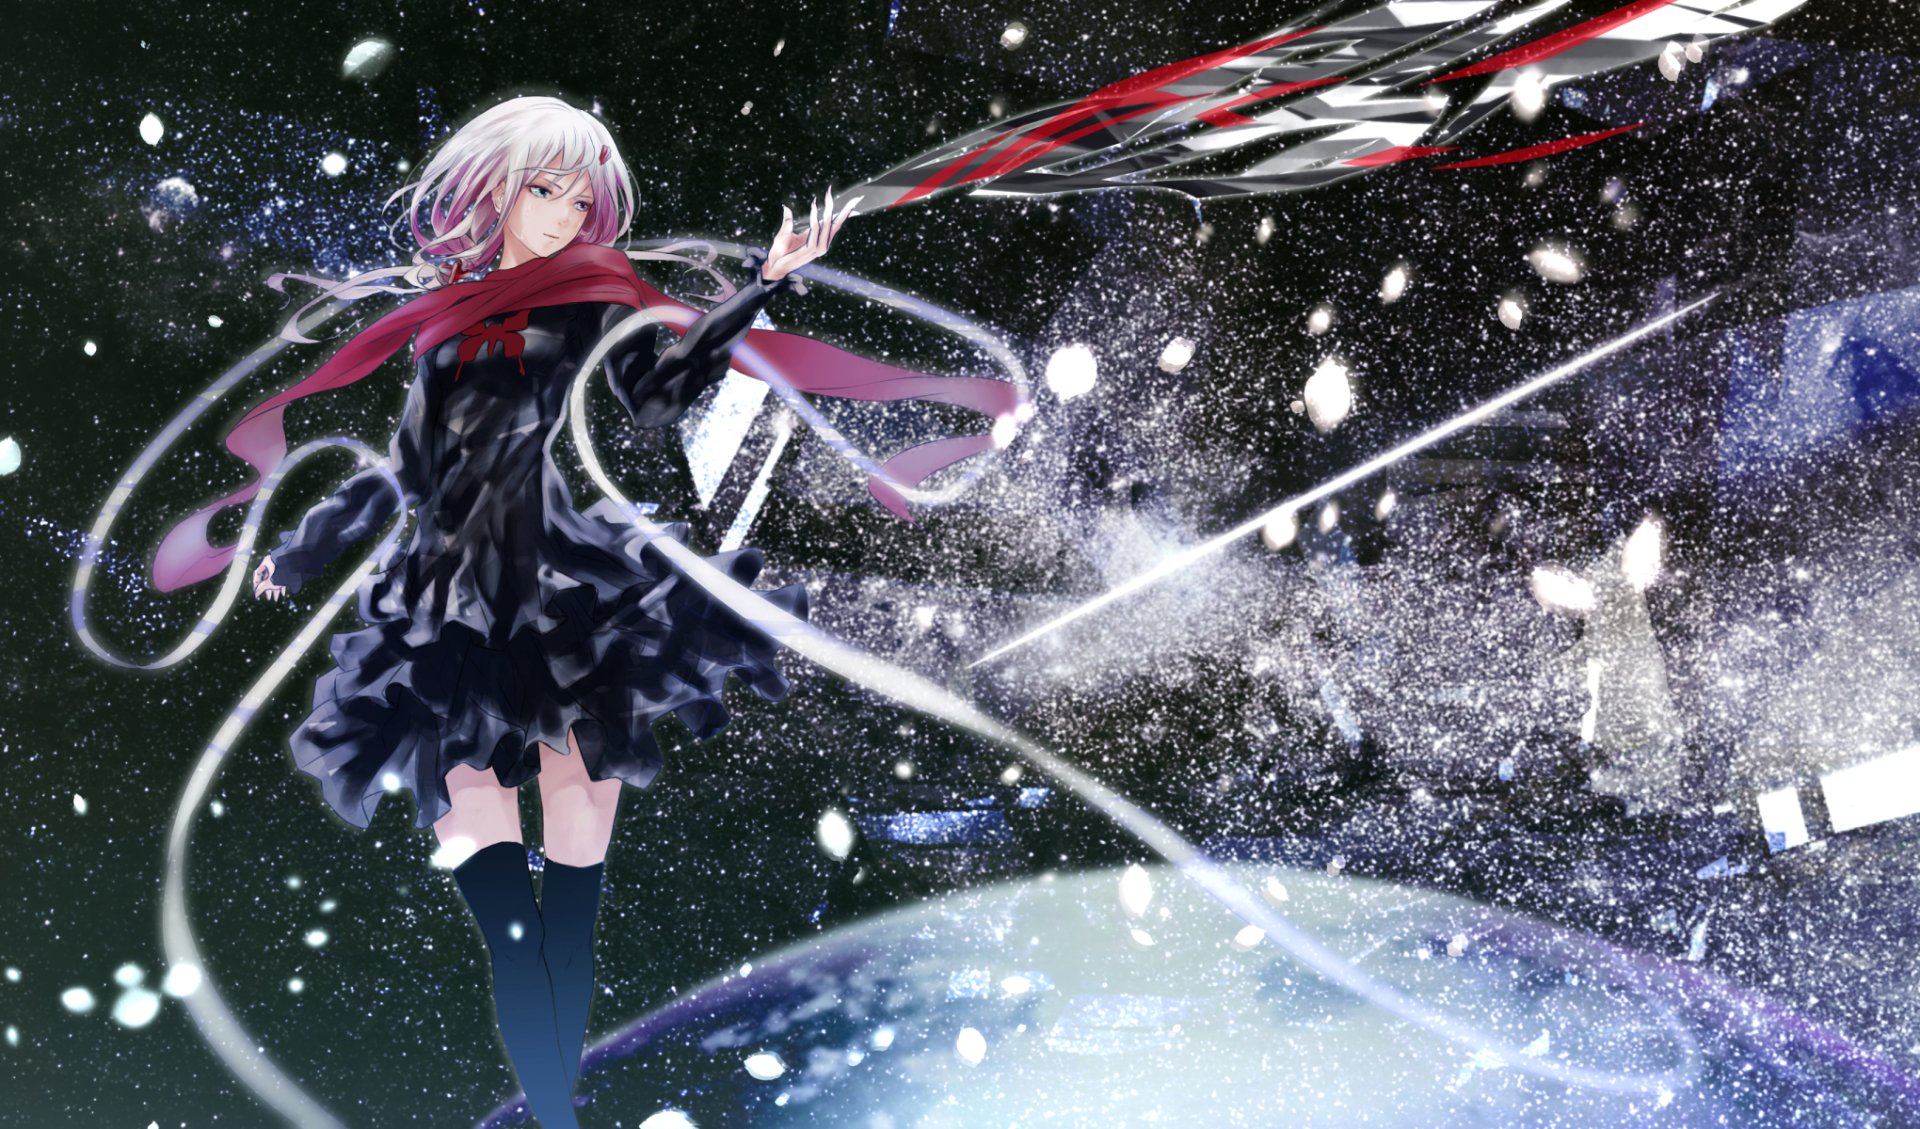 Guilty Crown Archives - Halcyon Realms - Art Book Reviews - Anime, Manga,  Film, Photography